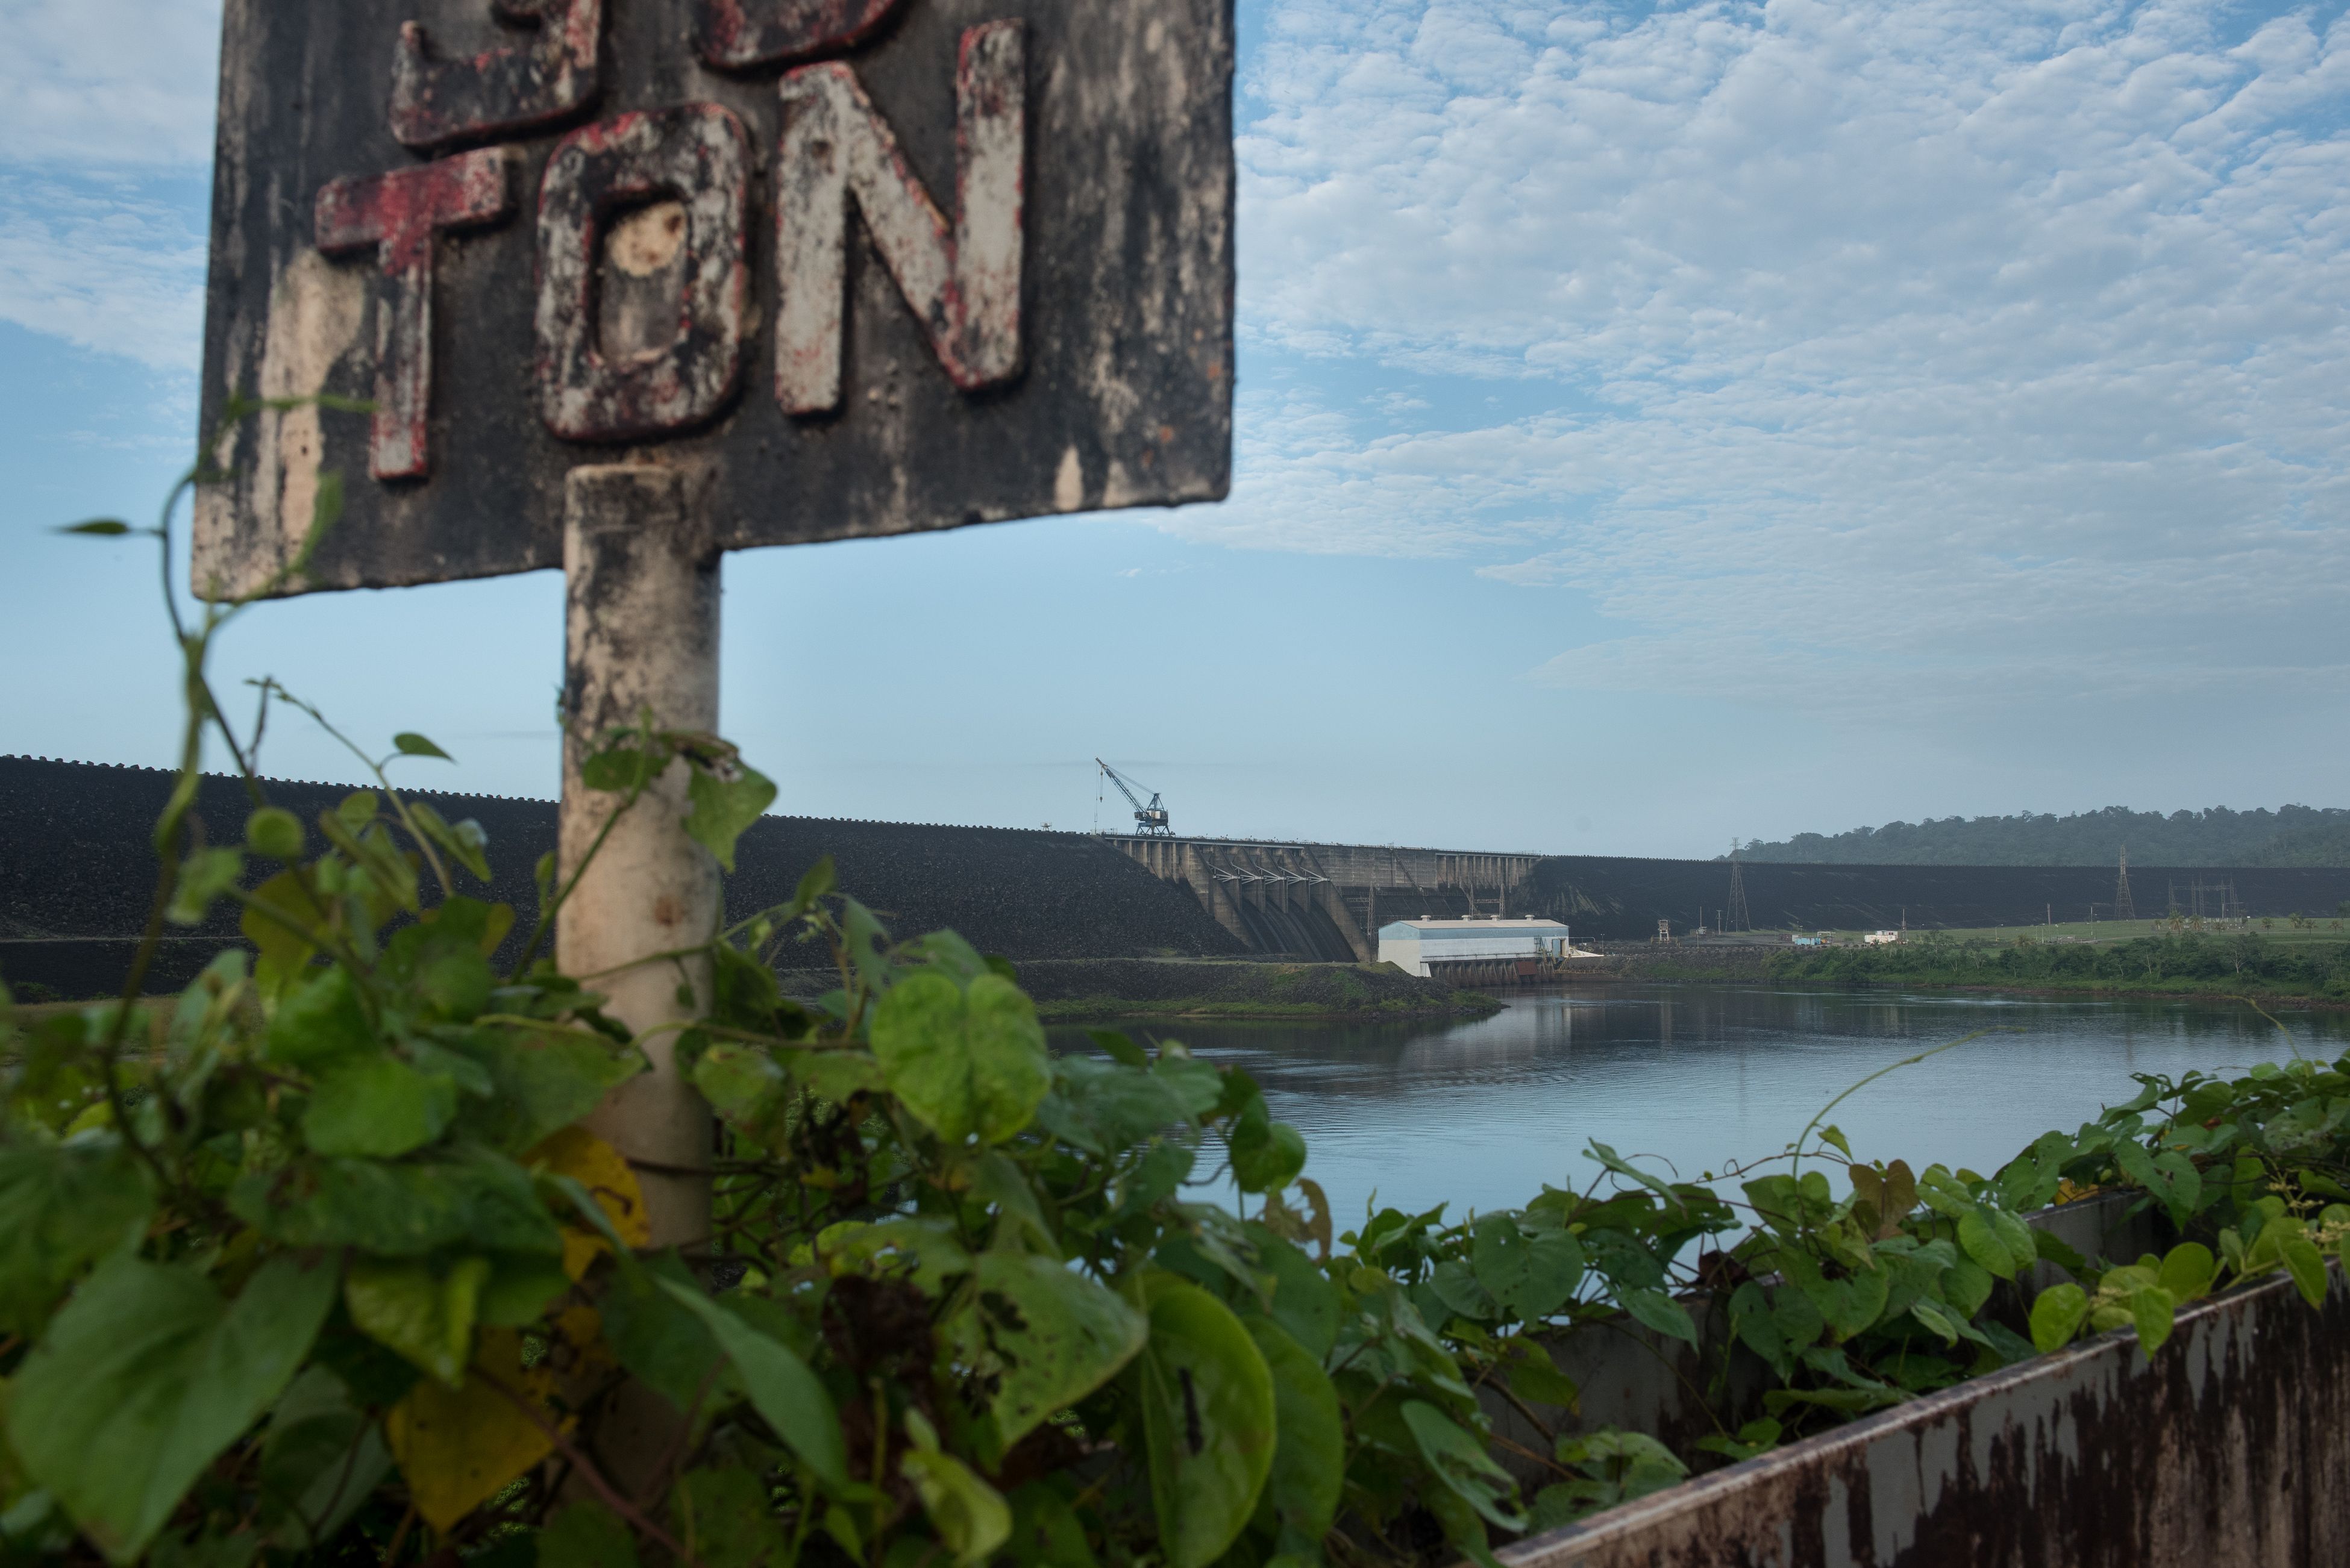 Alcoa's Afobaka Dam jolted Suriname into modernity, even as it flooded 618 square miles of jungle and displaced 6,000 people. Now, as Alcoa leaves Suriname, it is a centerpiece of the country's economic crisis and political turmoil. By Stephanie Strasburg